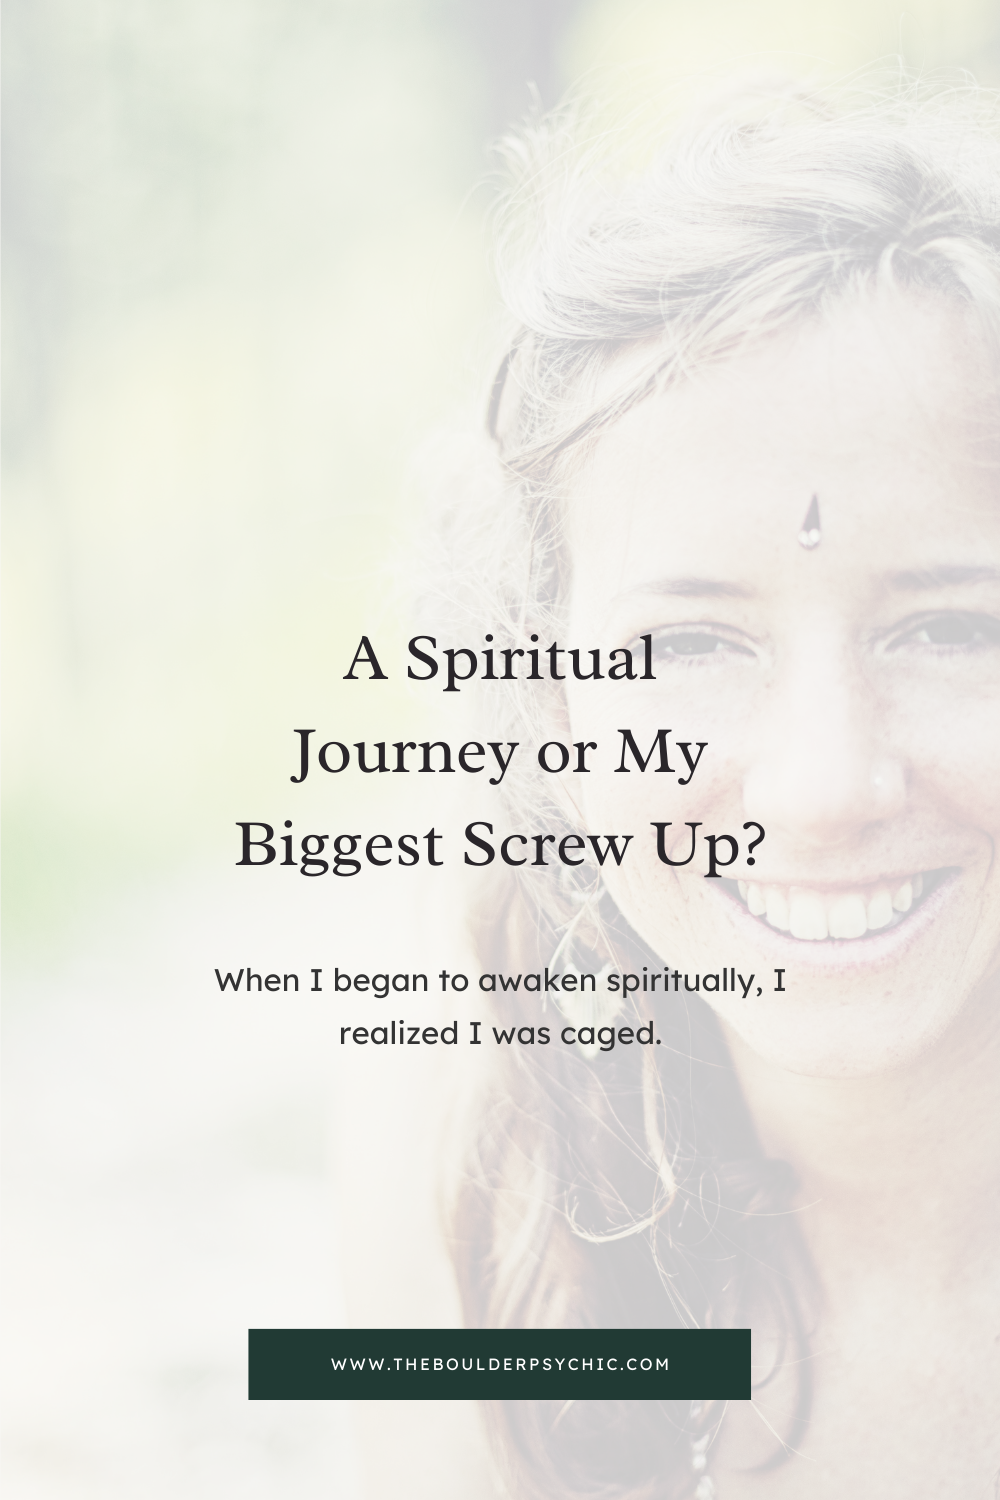 A Spiritual Journey or My Biggest Screw Up?